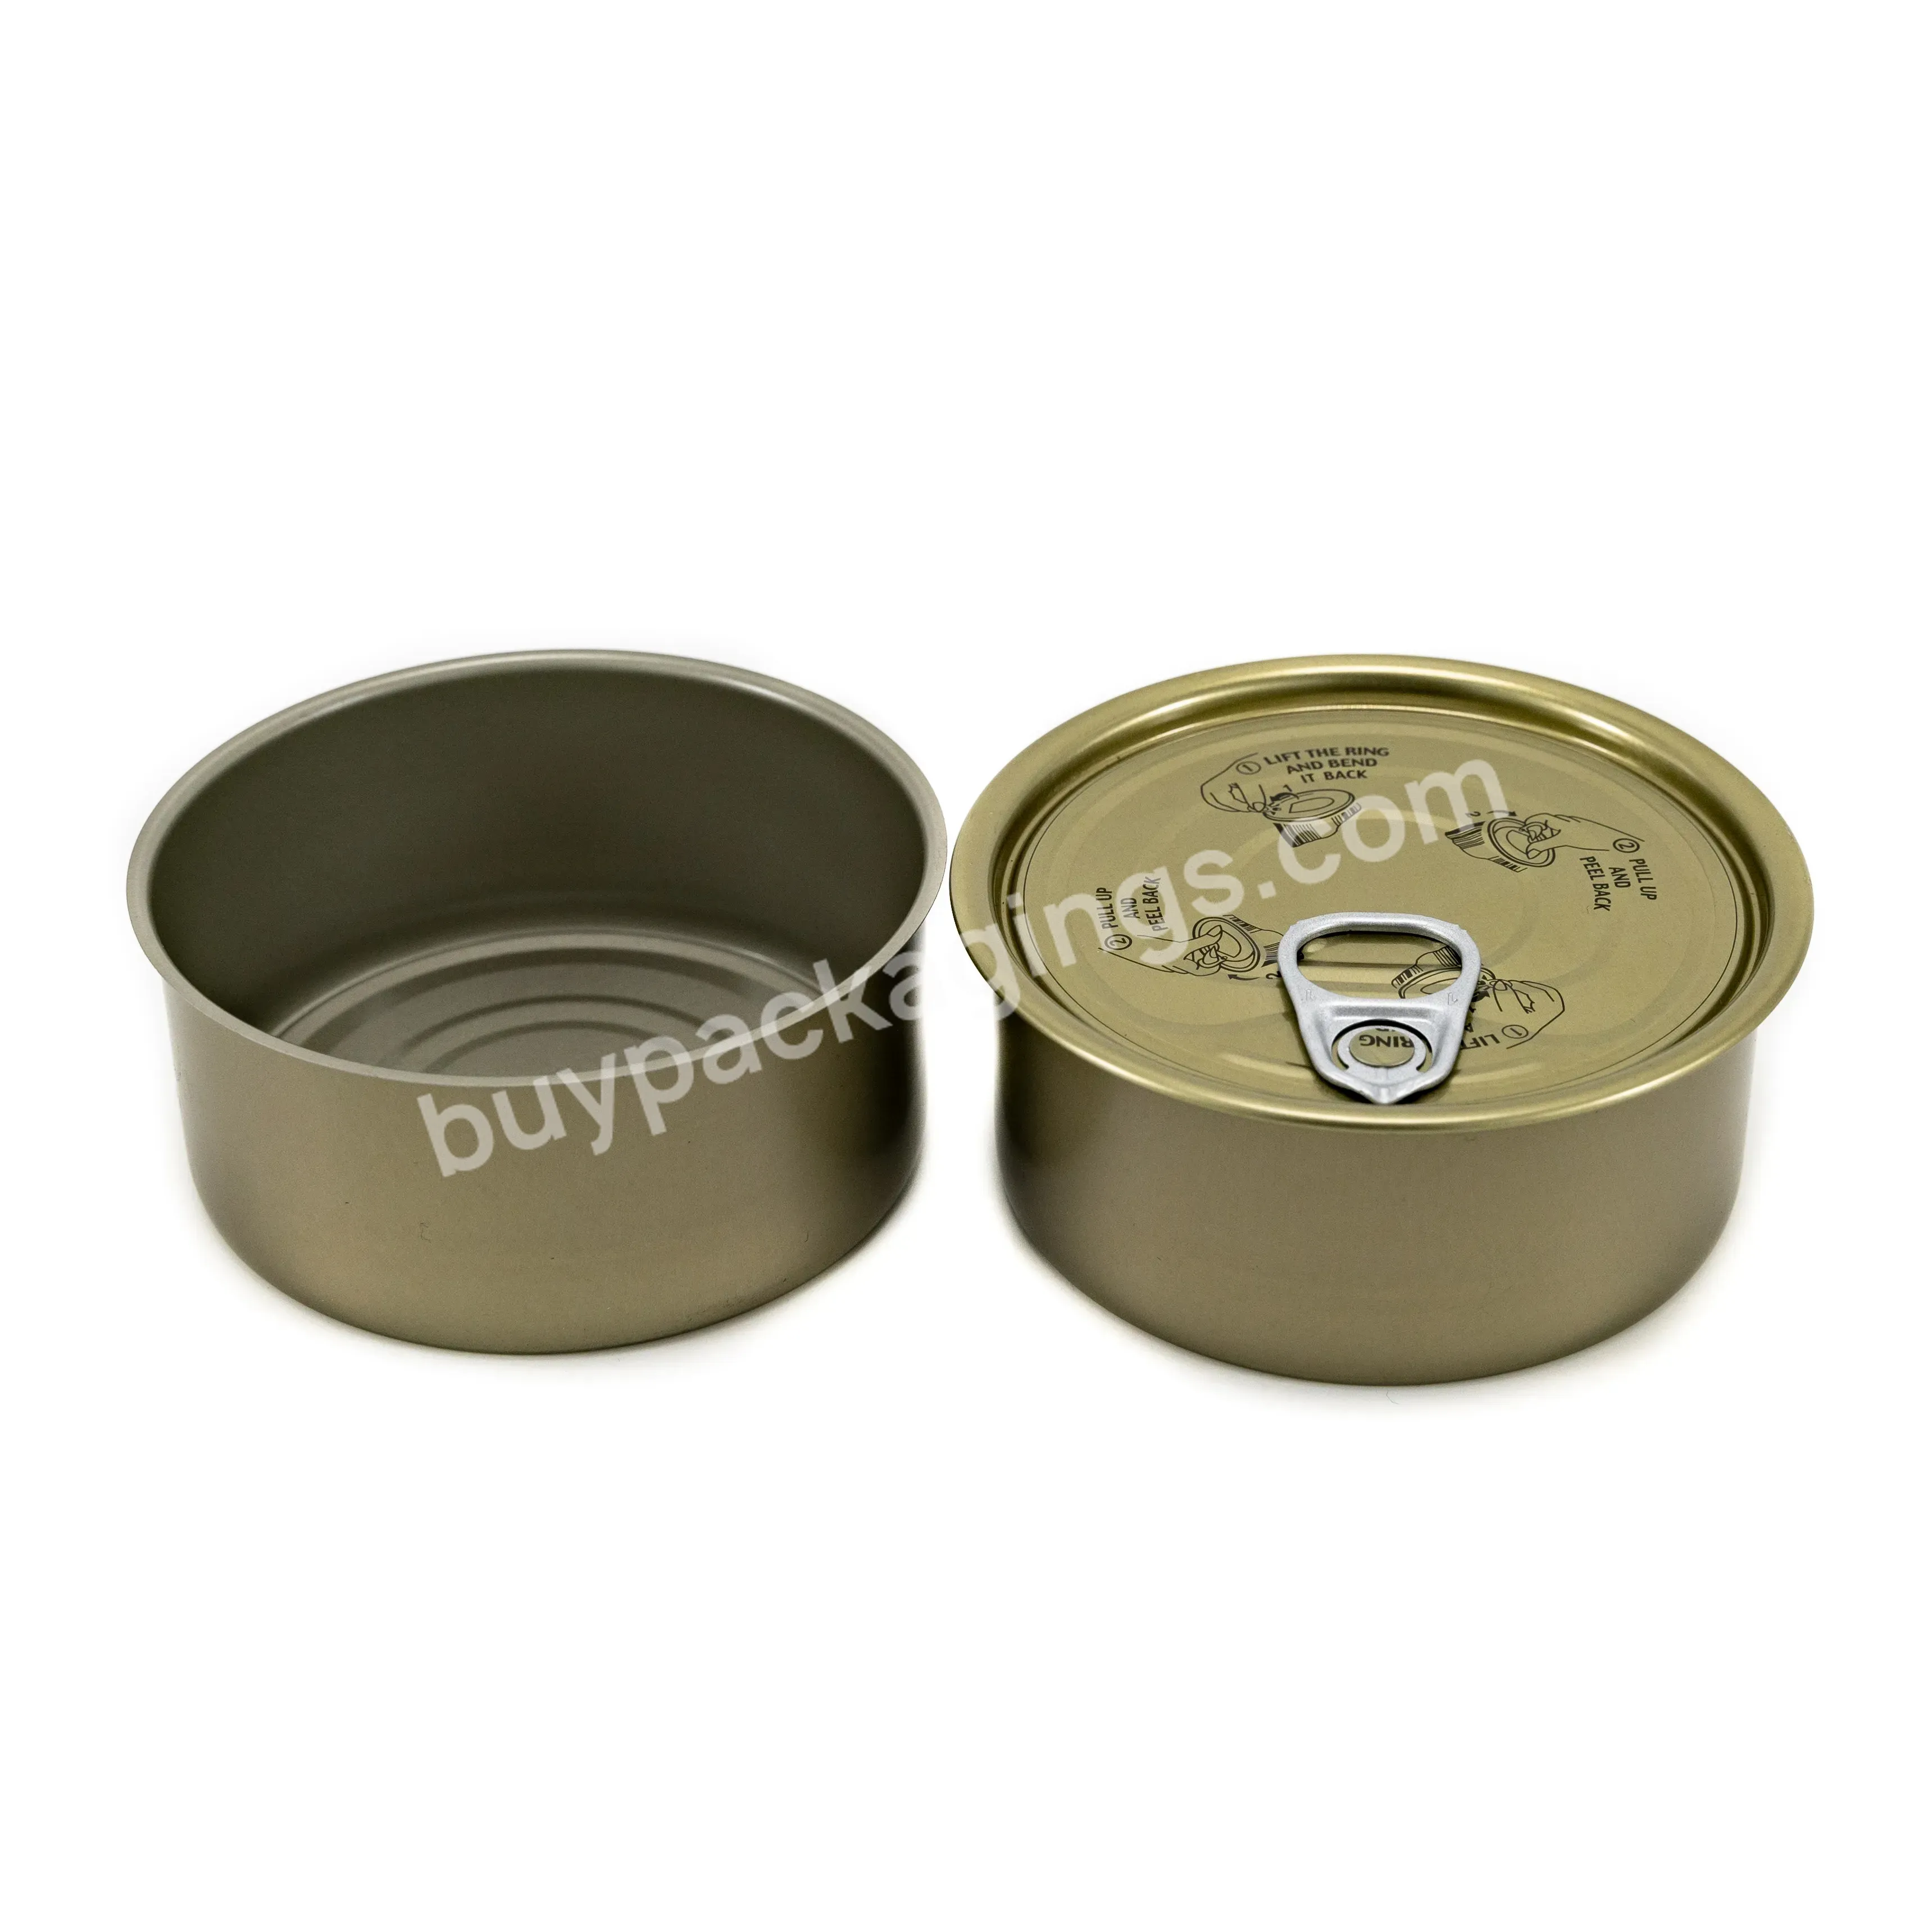 Wholesale Price Food Grade Empty 85g 100g 170g Tin Cans With Eoe Lids For Tuna Tomato Sauce Pet Food Canning - Buy Self Sealing Canister Empty 90g 100ml 170g Tin Cans Wholesale Labeling For Tuna Air Freshener Tea Seeds Pet Food,Color Customized Tin C